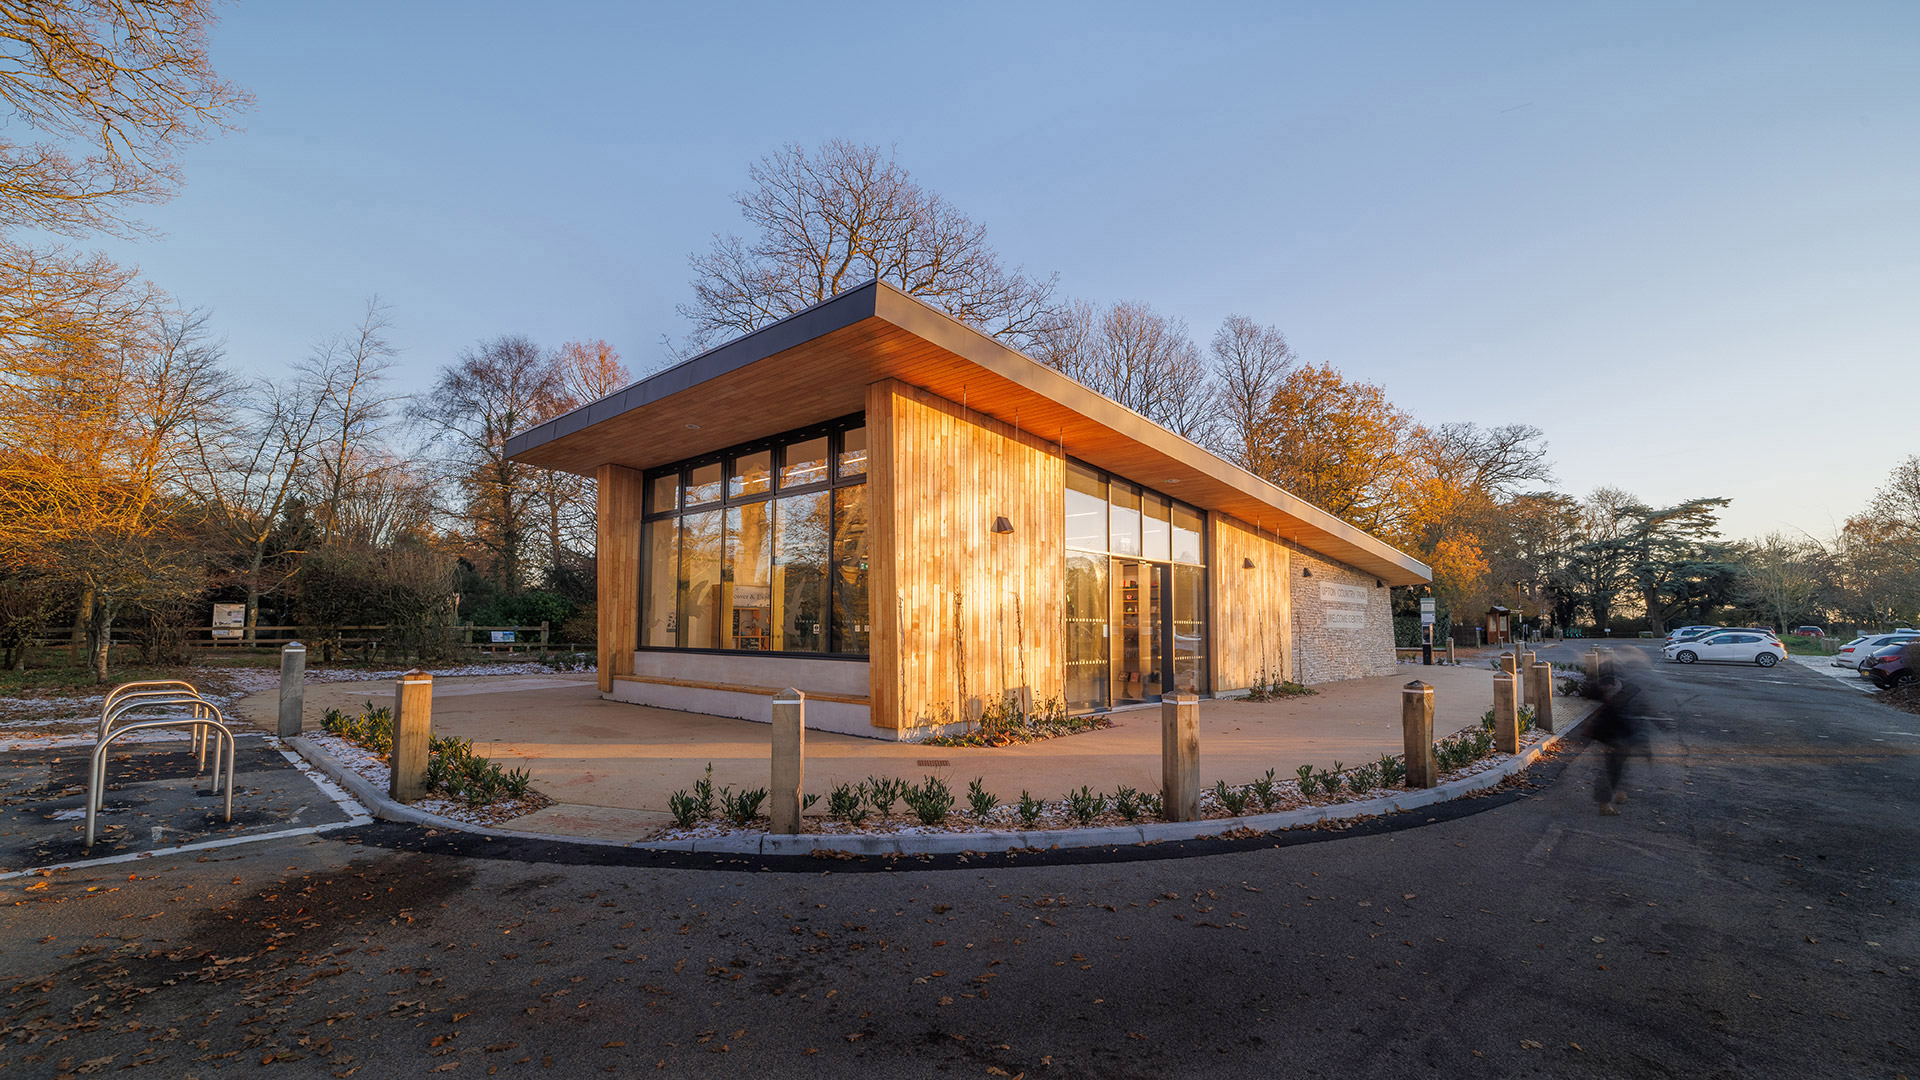 information centre with wood cladding and sloping roof at dusk with car park behind